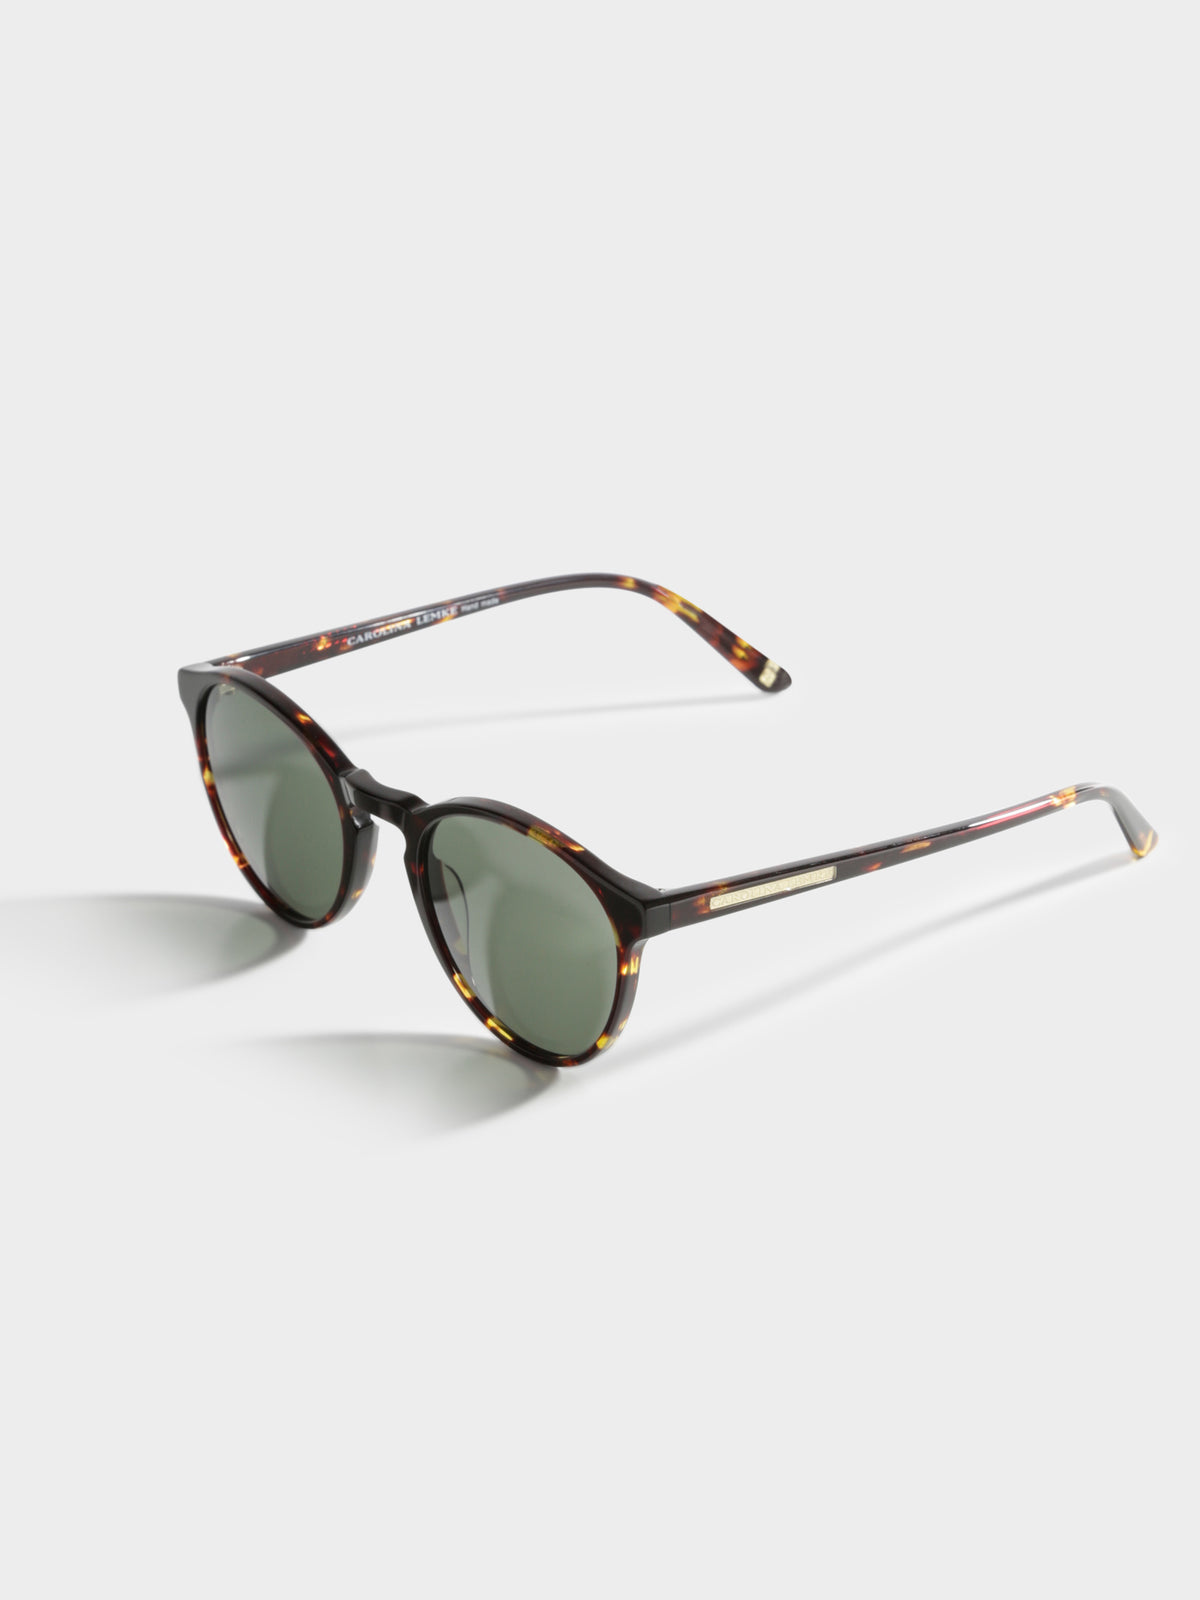 Paco CL7644 Sunglasses in Tortoise Shell